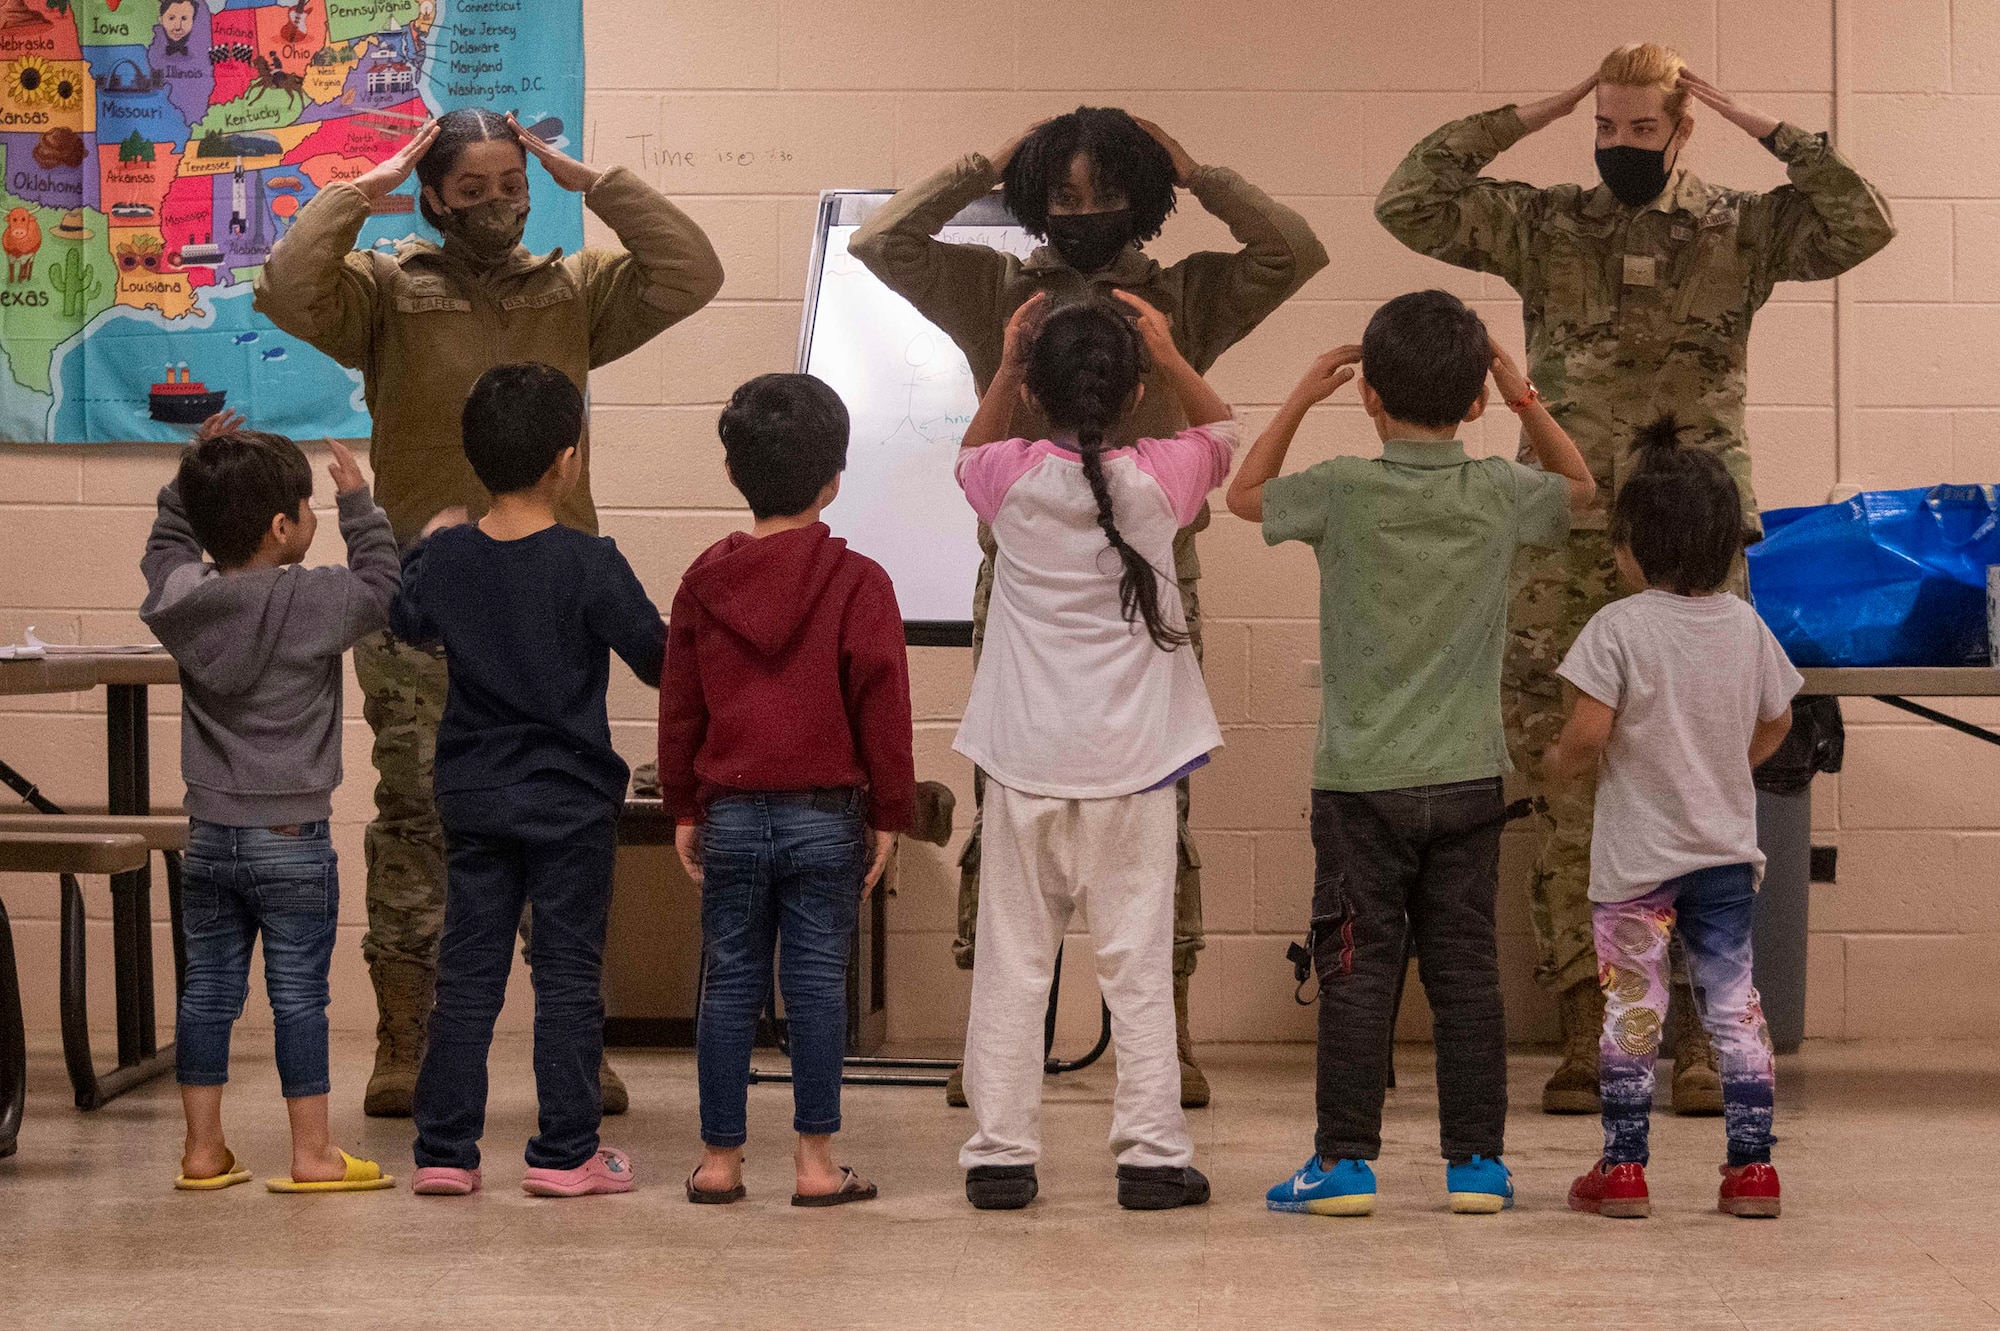 Airmen from the 445th Airlift Wing and 88th Air Base Wing assigned to Task Force-Liberty, sing the “head, shoulders, knees and toes” song with Afghan children in Liberty Village on Joint Base McGuire-Dix-Lakehurst, New Jersey, Feb. 1, 2022. The Department of Defense, through U.S. Northern Command, and in support of the Department of Homeland Security, is providing transportation, temporary housing, medical screening, and general support for at least 11,000 Afghan evacuees at Liberty Village, in permanent or temporary structures, as quickly as possible. This initiative provides Afghan personnel essential support at secure locations outside Afghanistan.